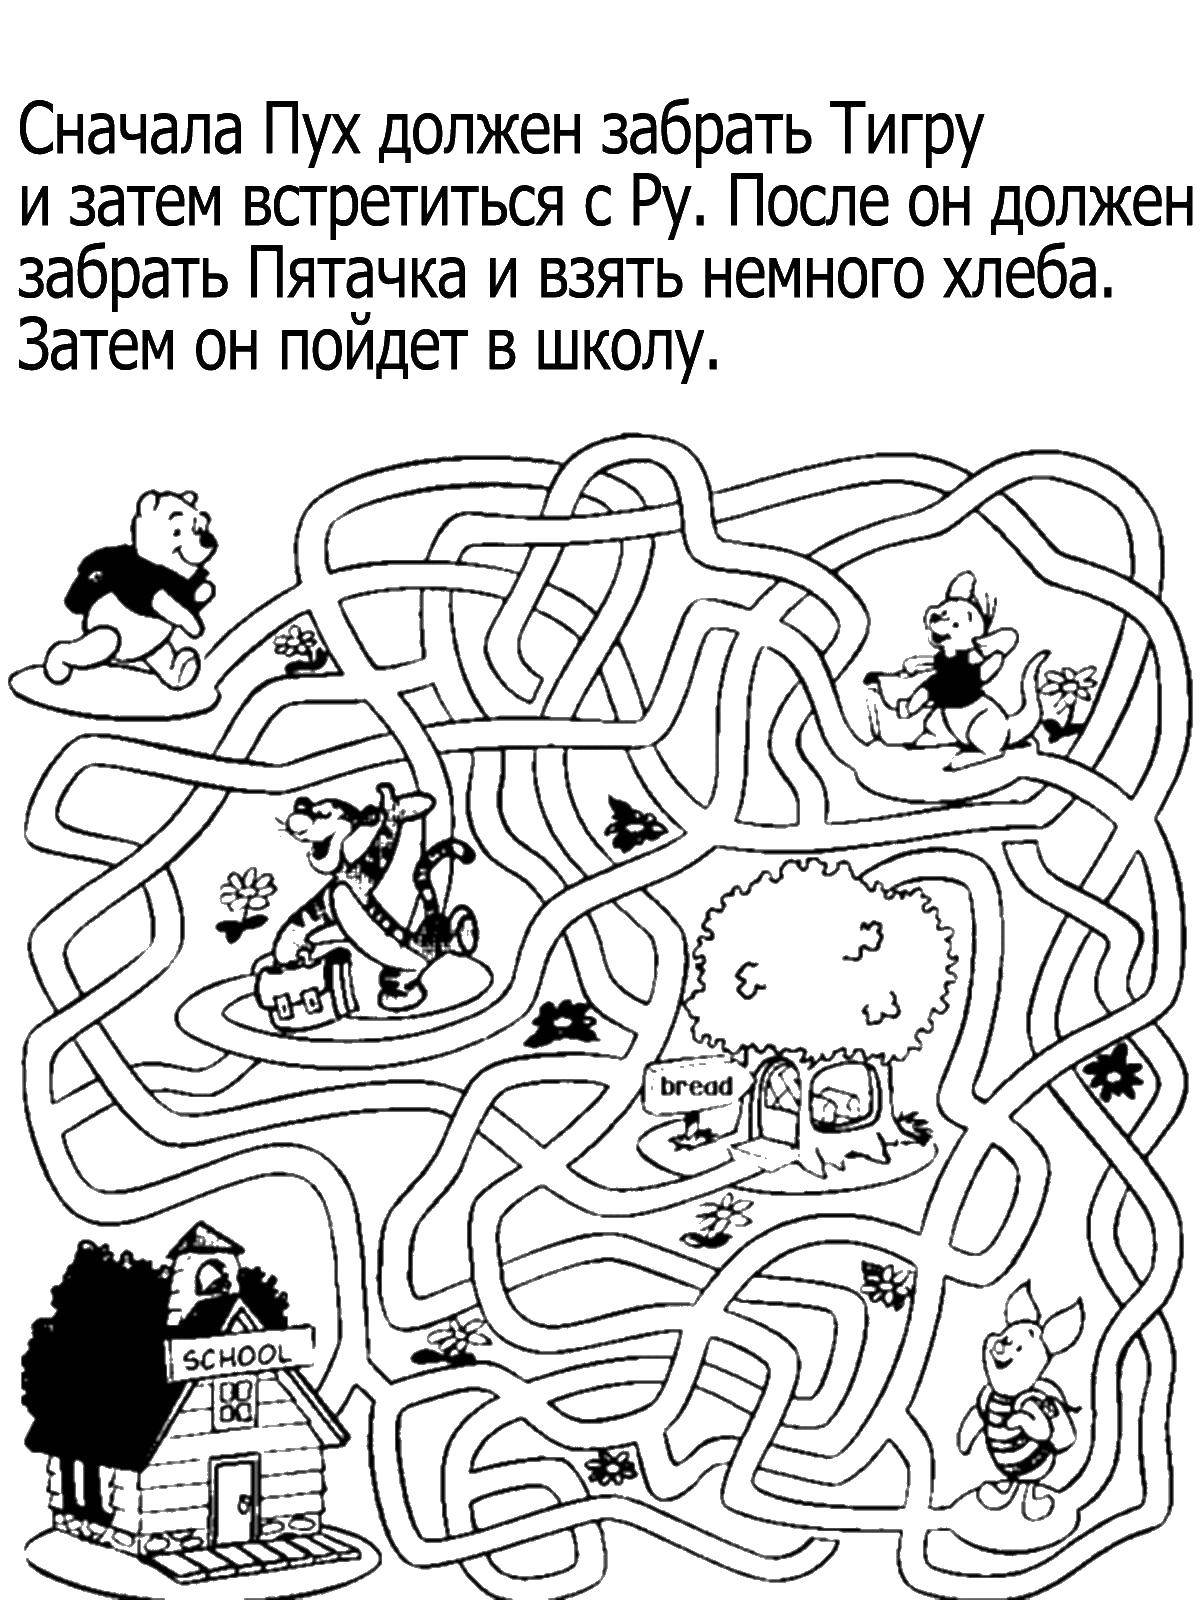 Coloring Winnie the Pooh. Category the labyrinth. Tags:  the labyrinth.